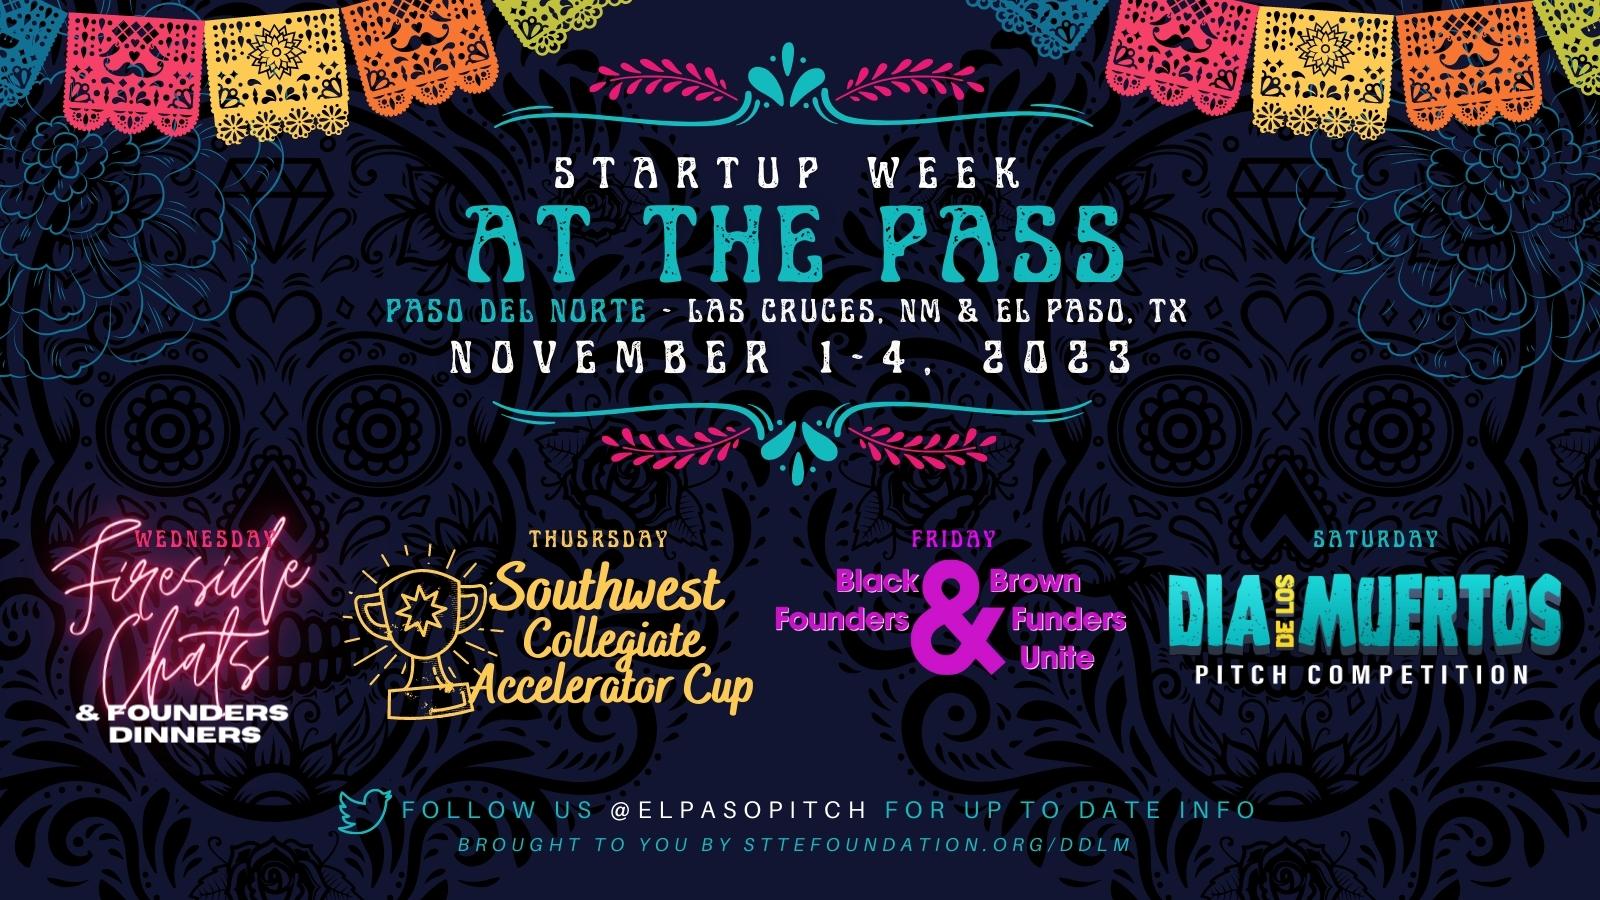 Startup Week at the Pass in El Paso, TX and Las Cruces, NM